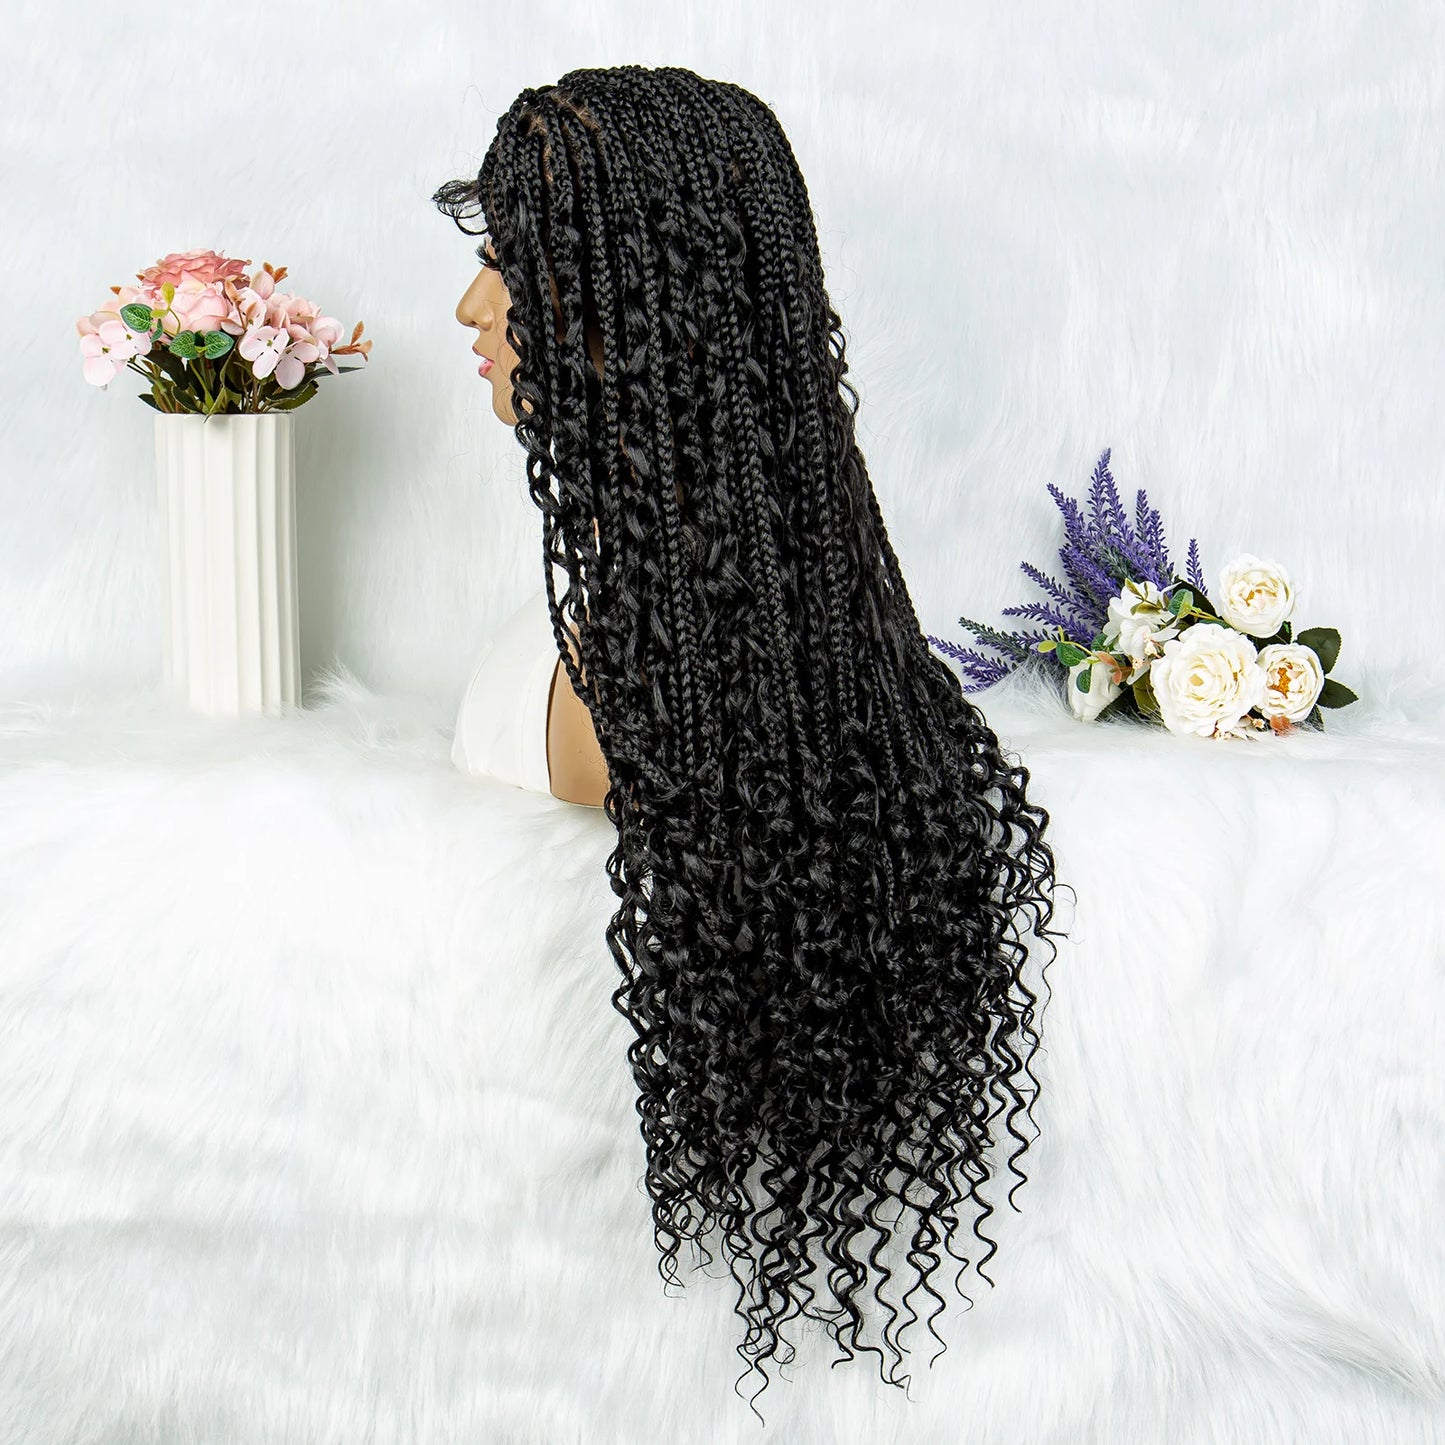 Knotless Curly Braids Wig